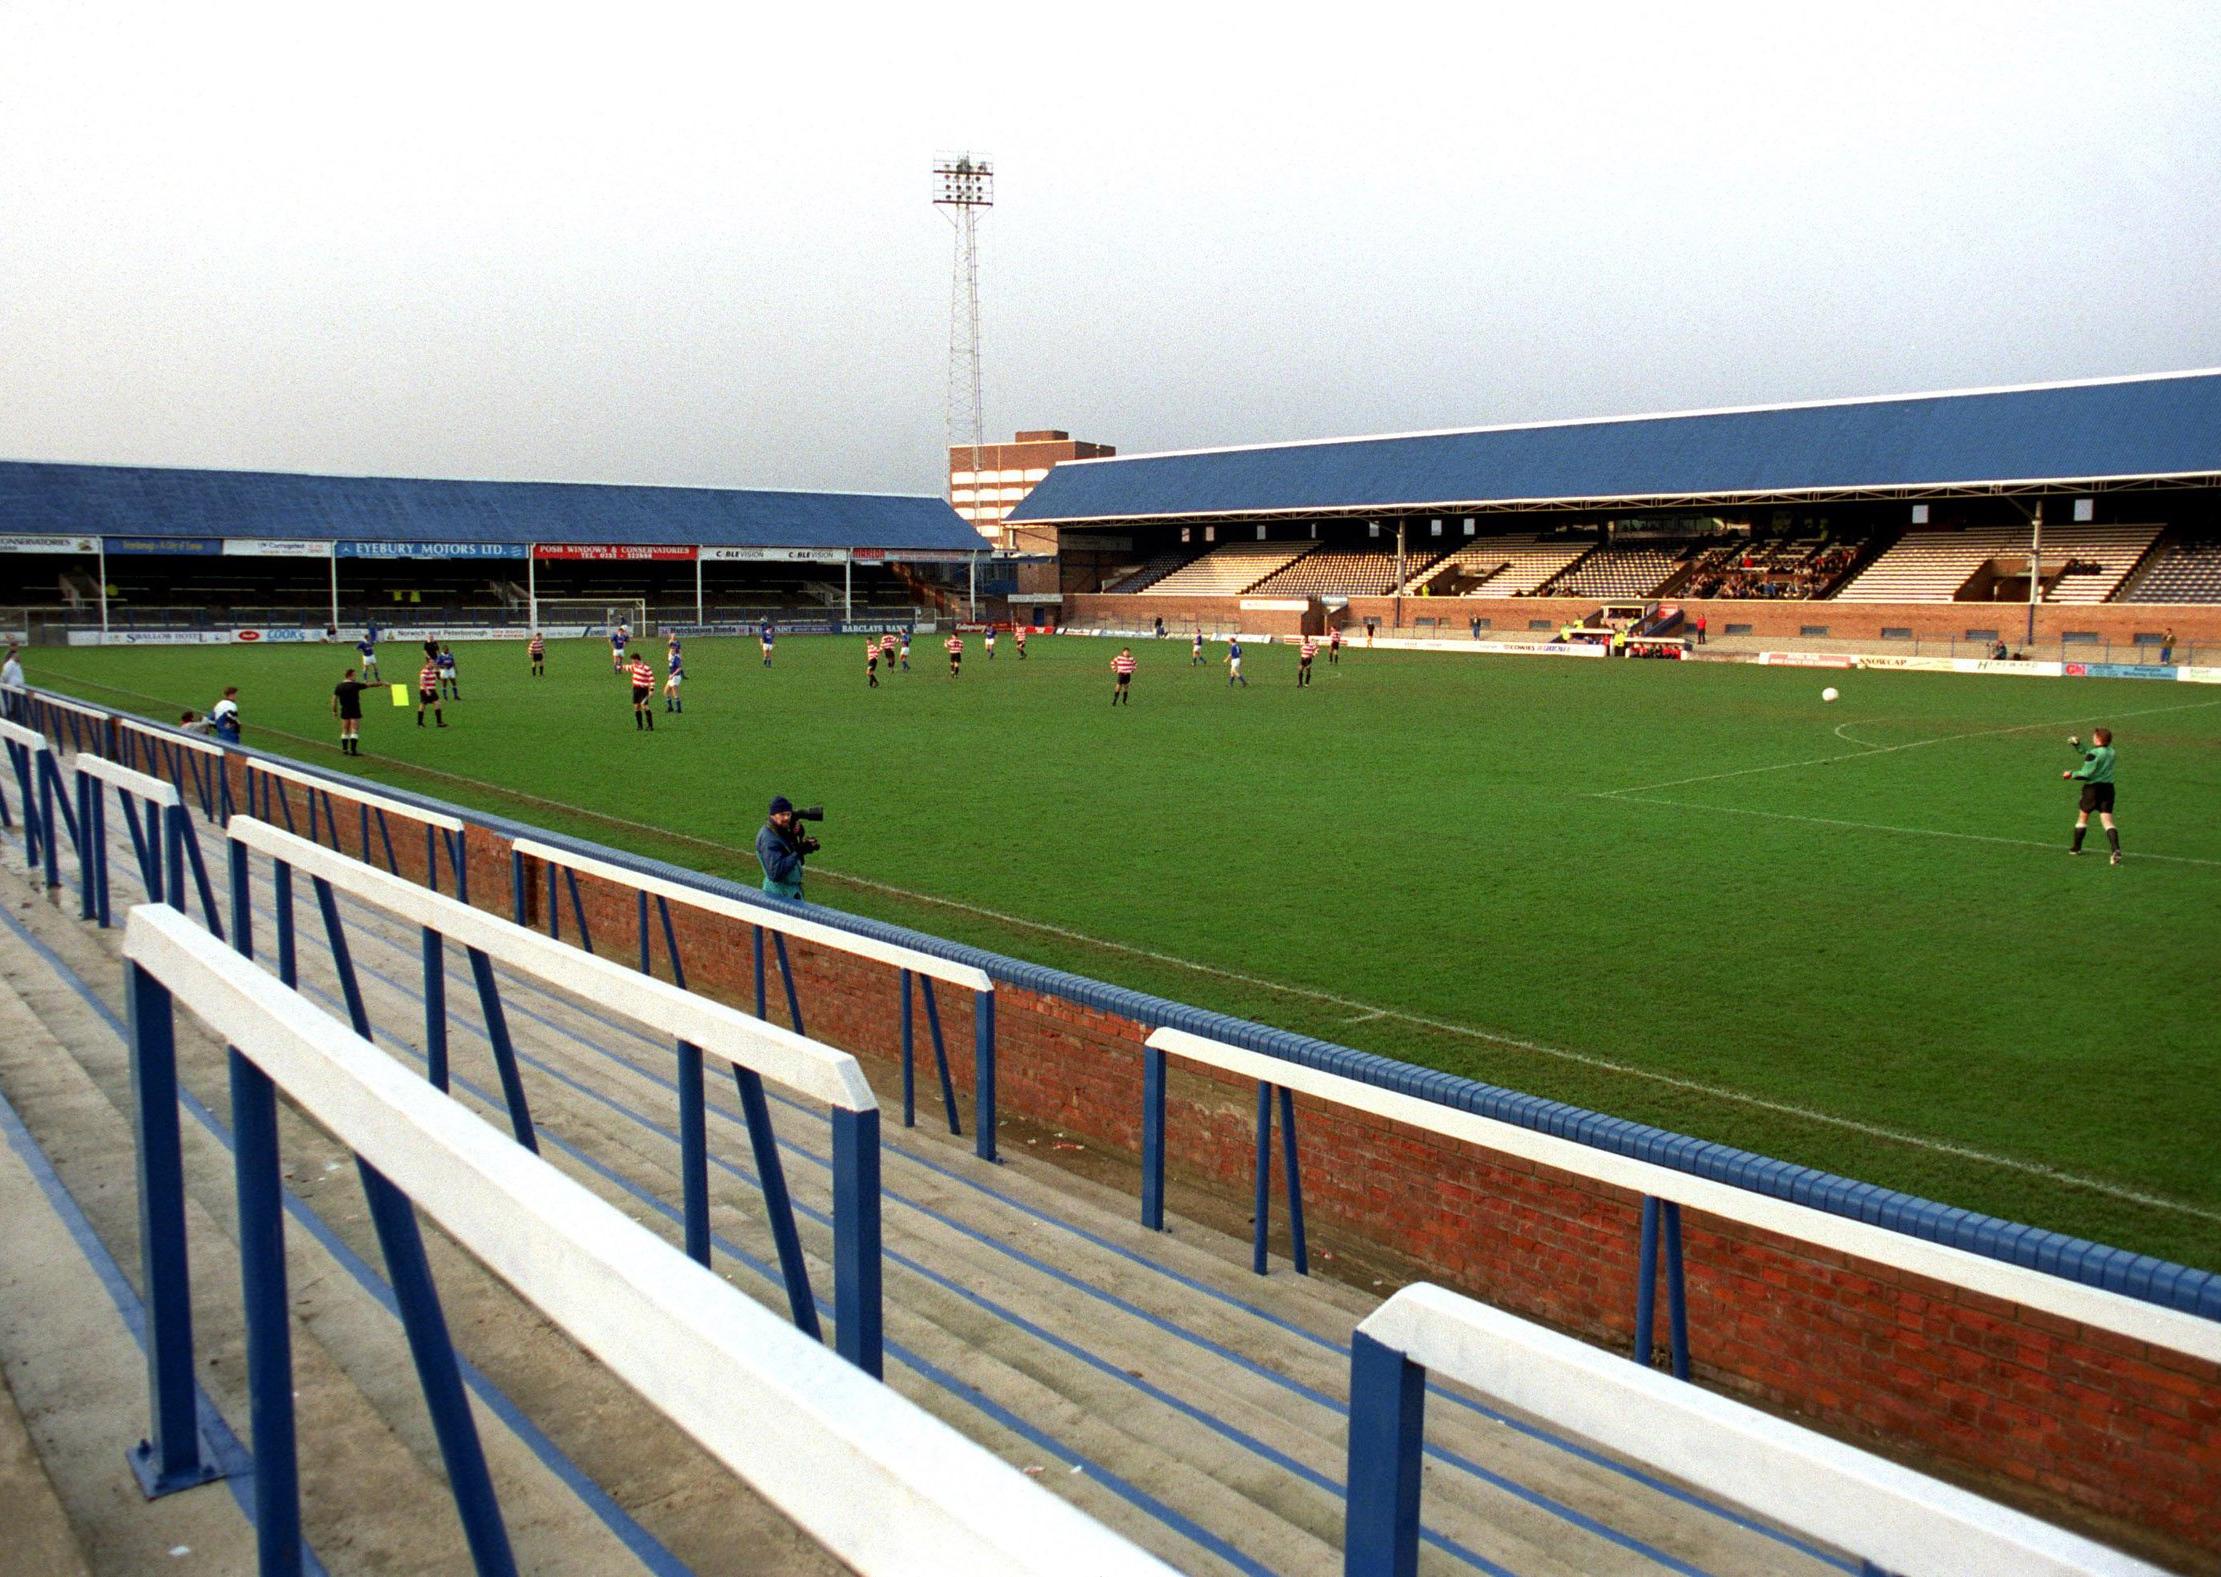 First Division Posh drew 1-1 away at non-league opposition, won the replay 9-1 (Tony Philliskirk scored five), but crowd trouble prompted an eerie re-match behind closed doors at London Road which Posh won 1-0.